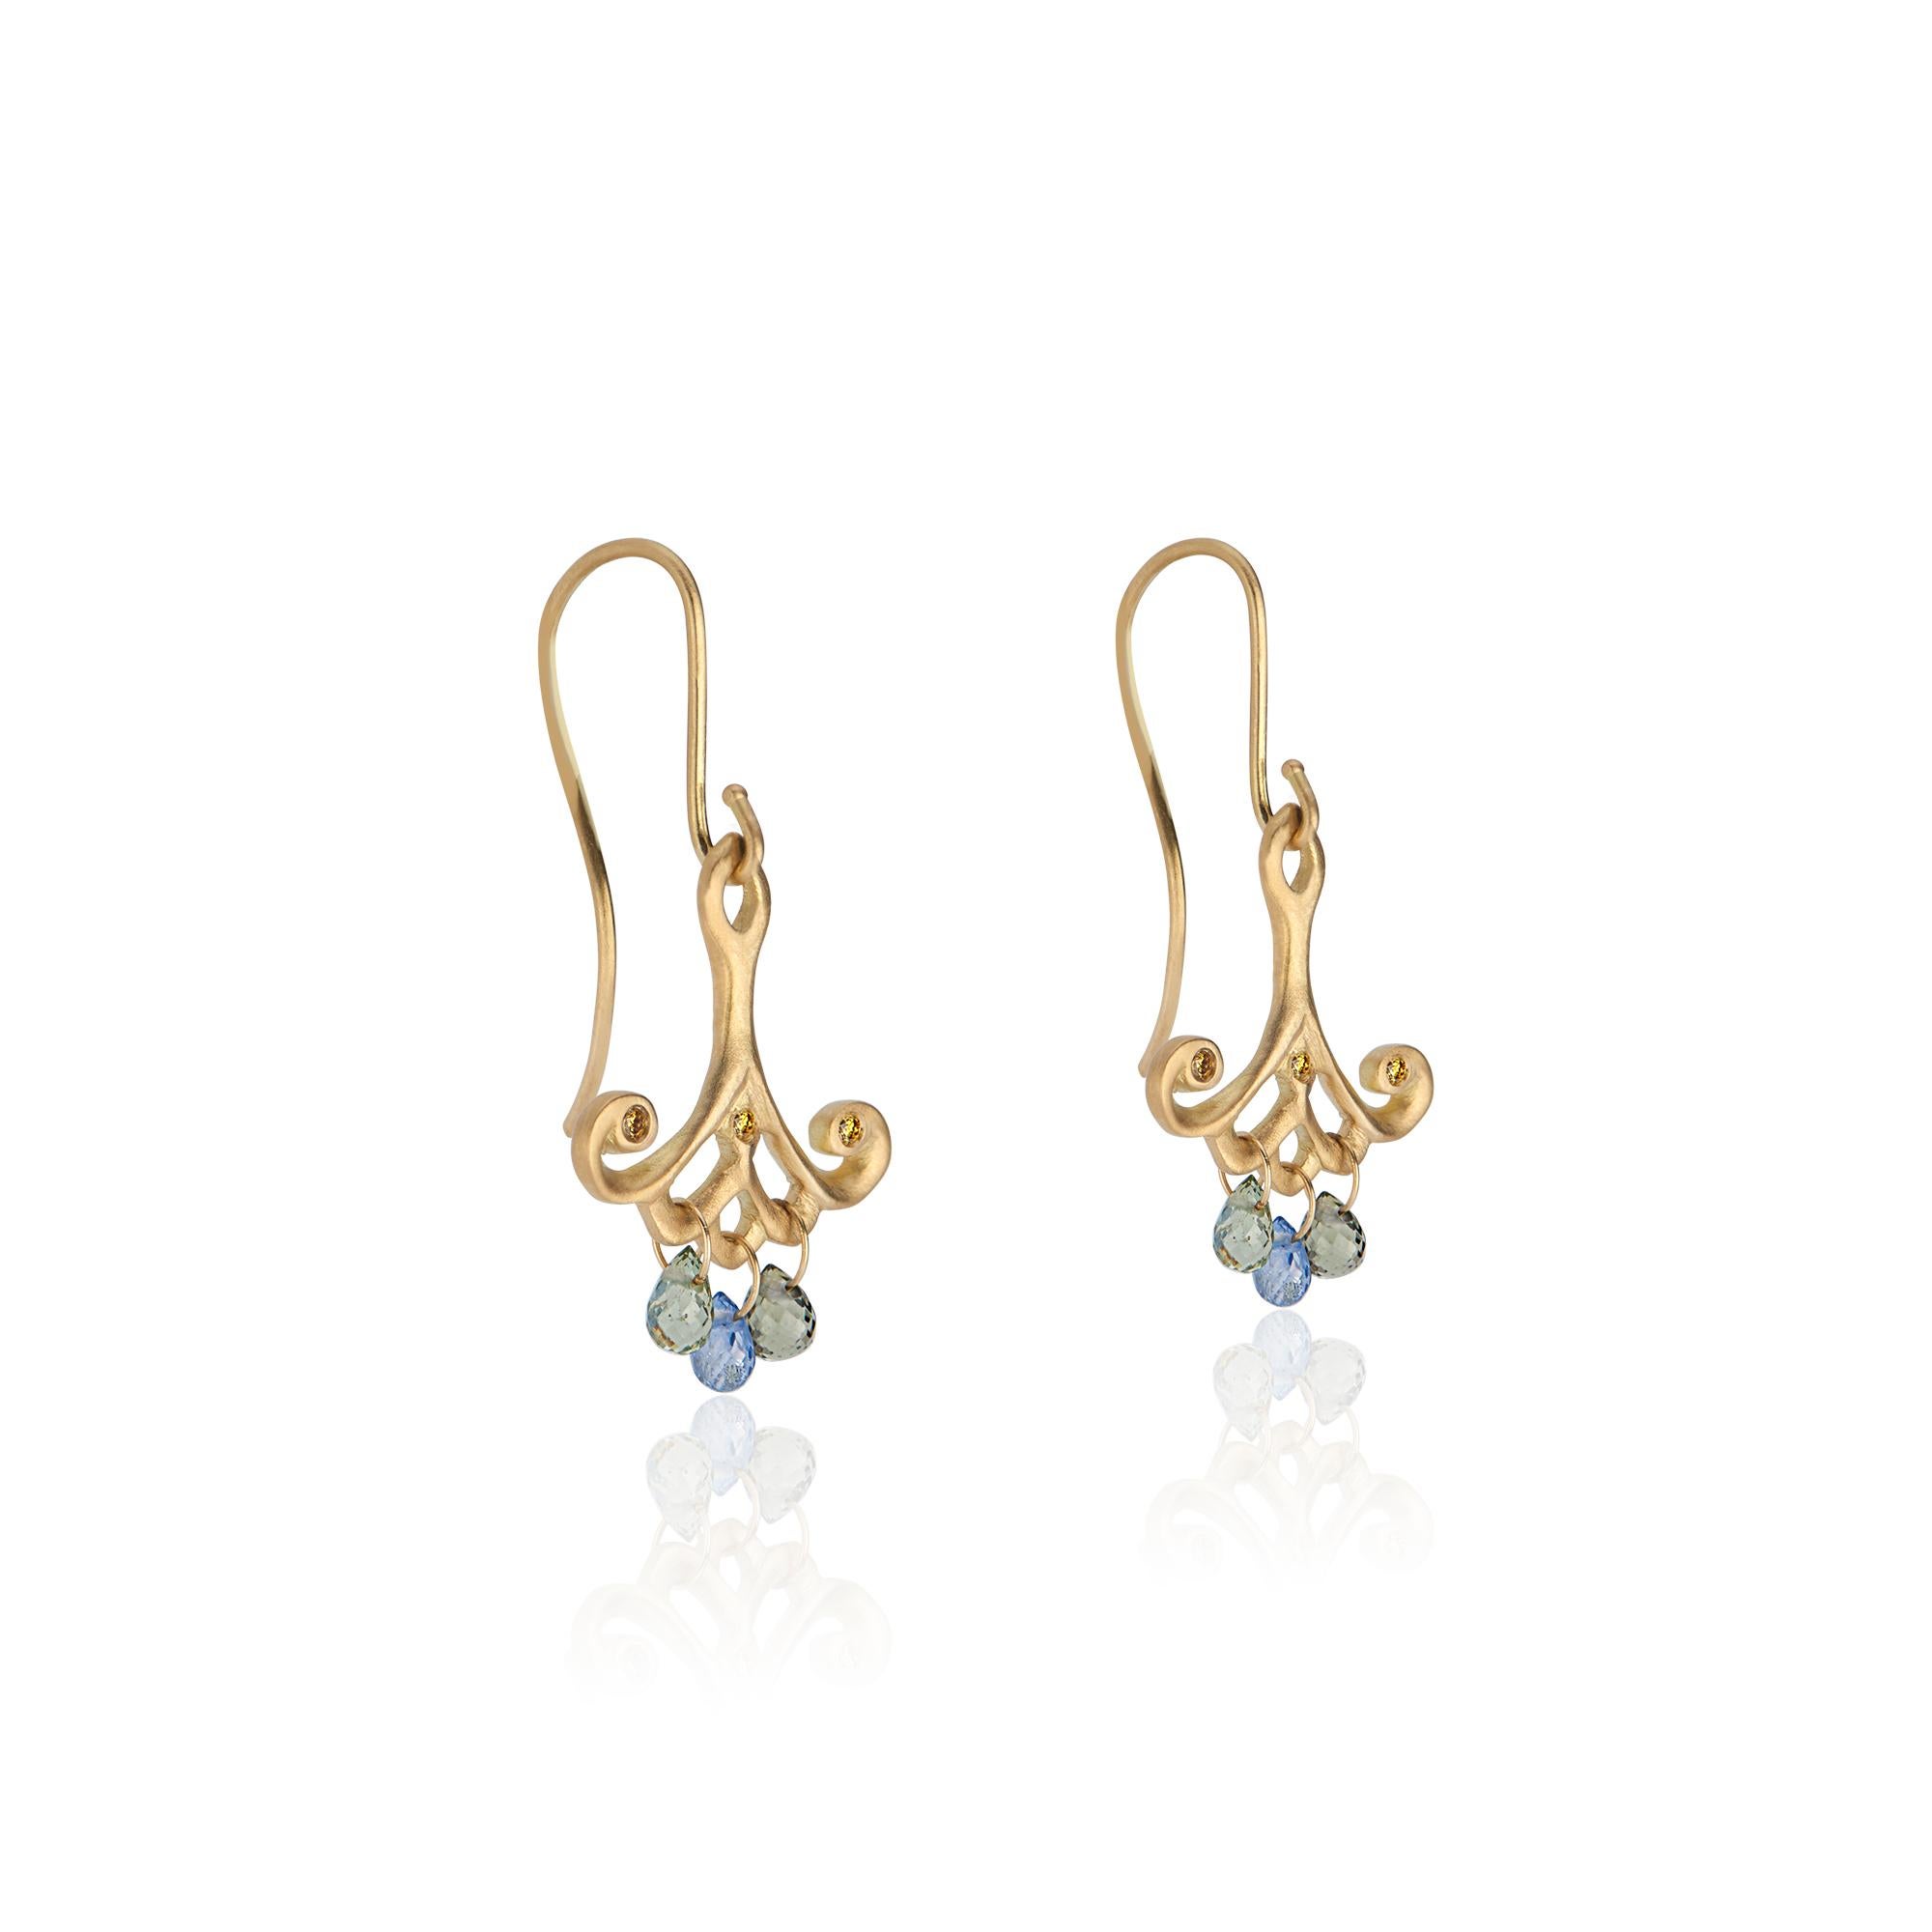 These earrings are an original design by Susan Mancuso of Forge and Foundry Jewels.  Hand crafted in our studio, these earrings were inspired by the lotus flower as depicted on the masterpiece ceramics created by the artists of the Ming and Qing